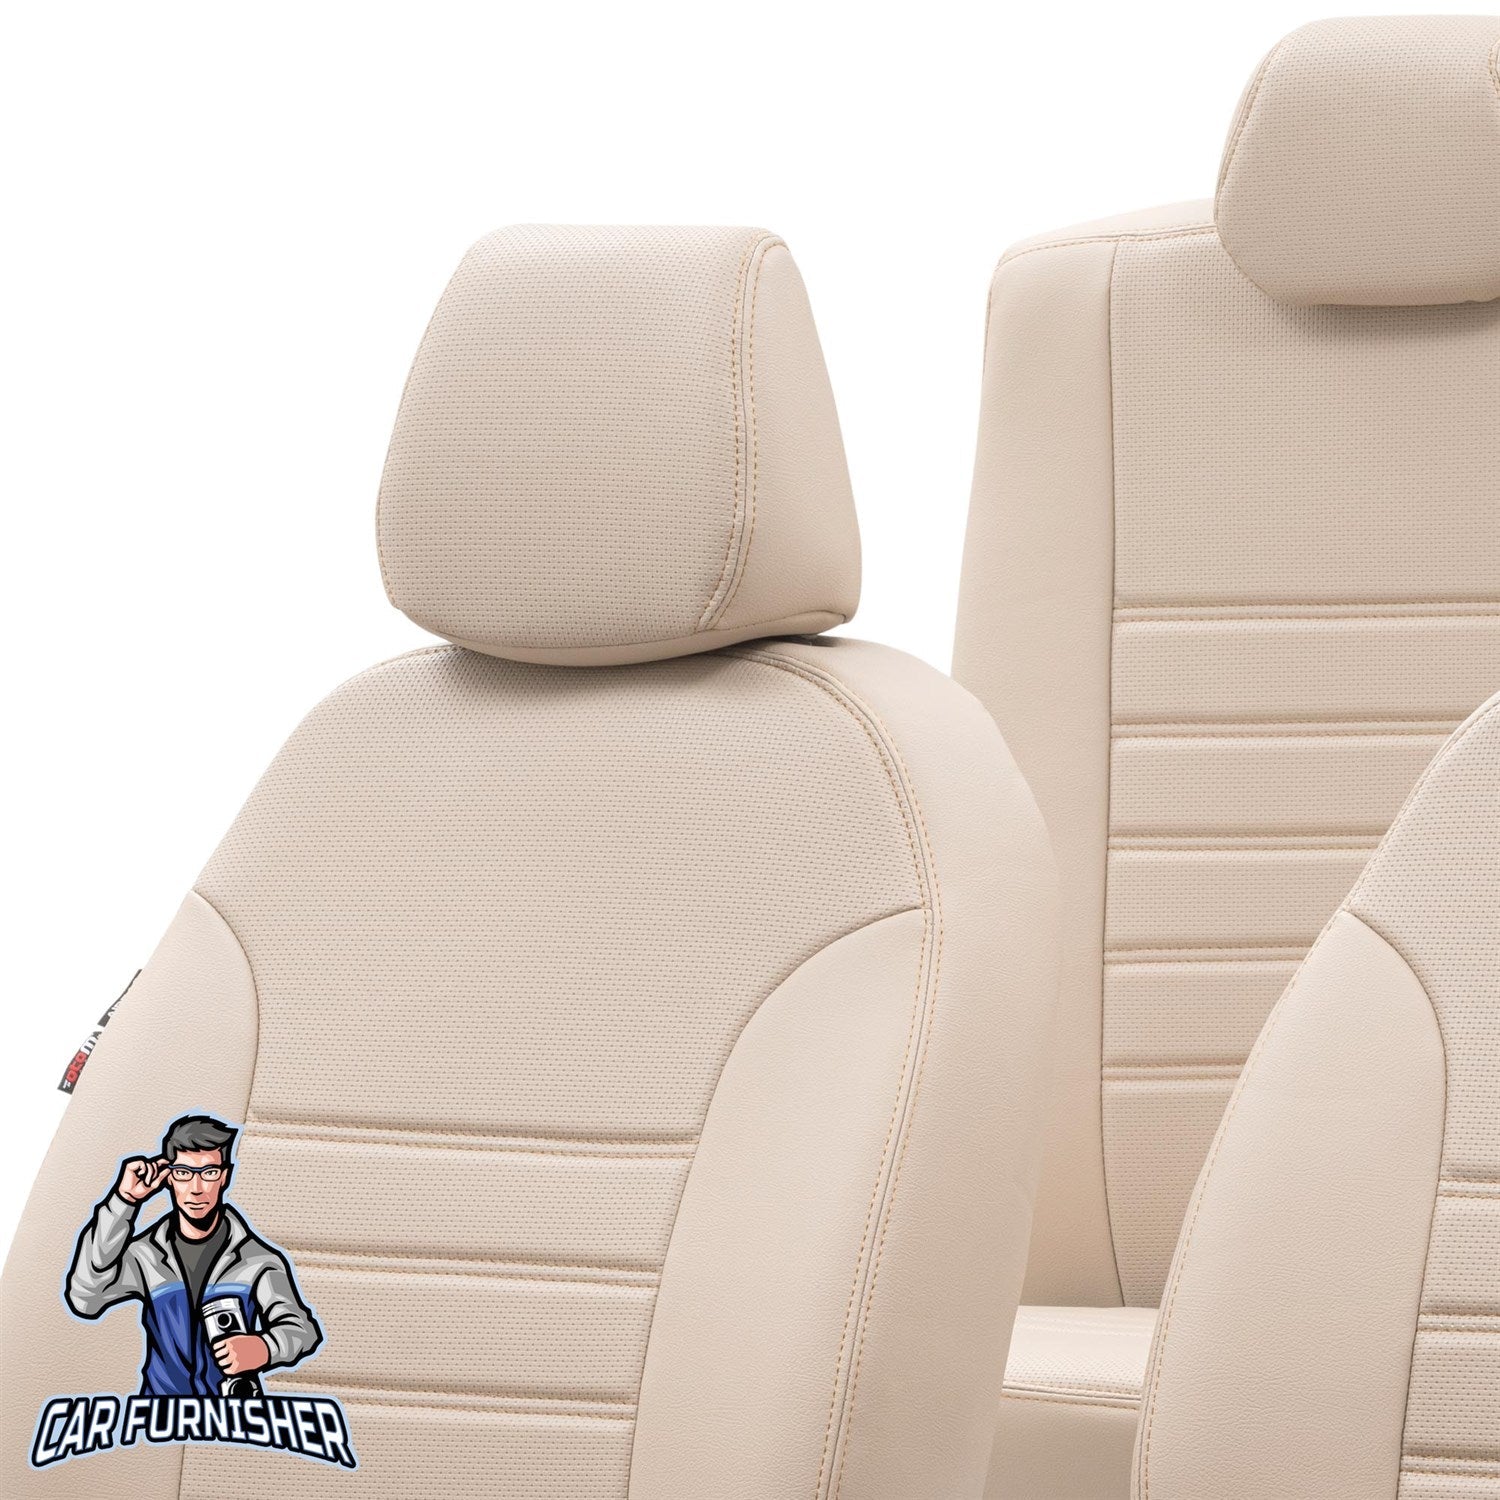 Toyota Prius Seat Cover New York Leather Design Beige Leather